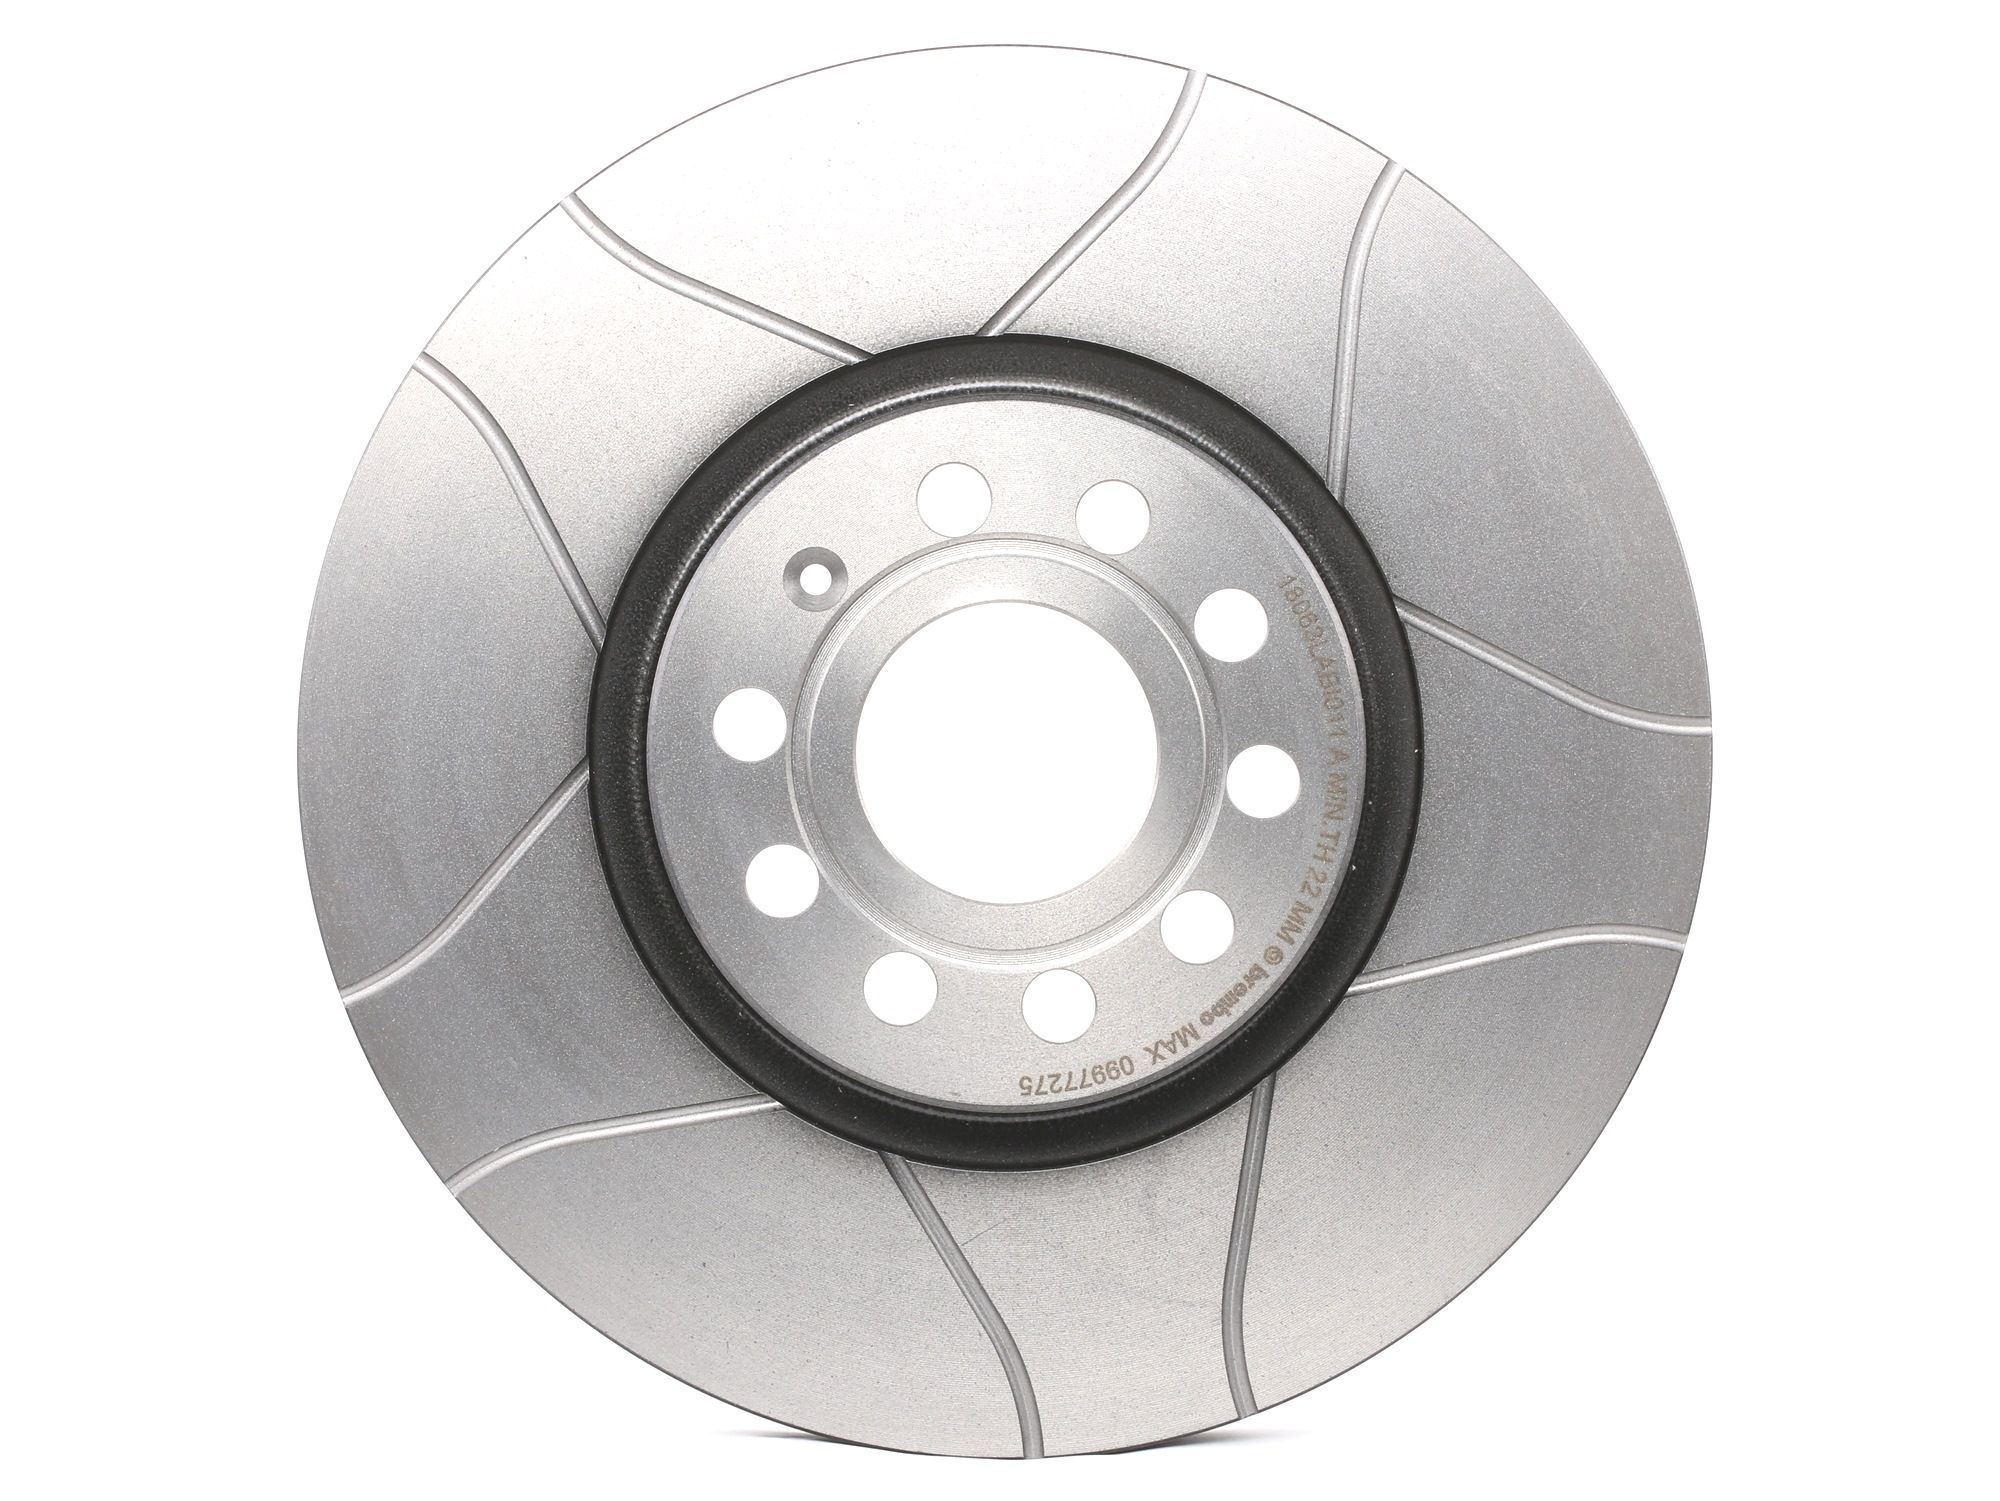 Car spare parts VW TIGUAN 2014: Brake Disc BREMBO 09.9772.75 at a discount — buy now!